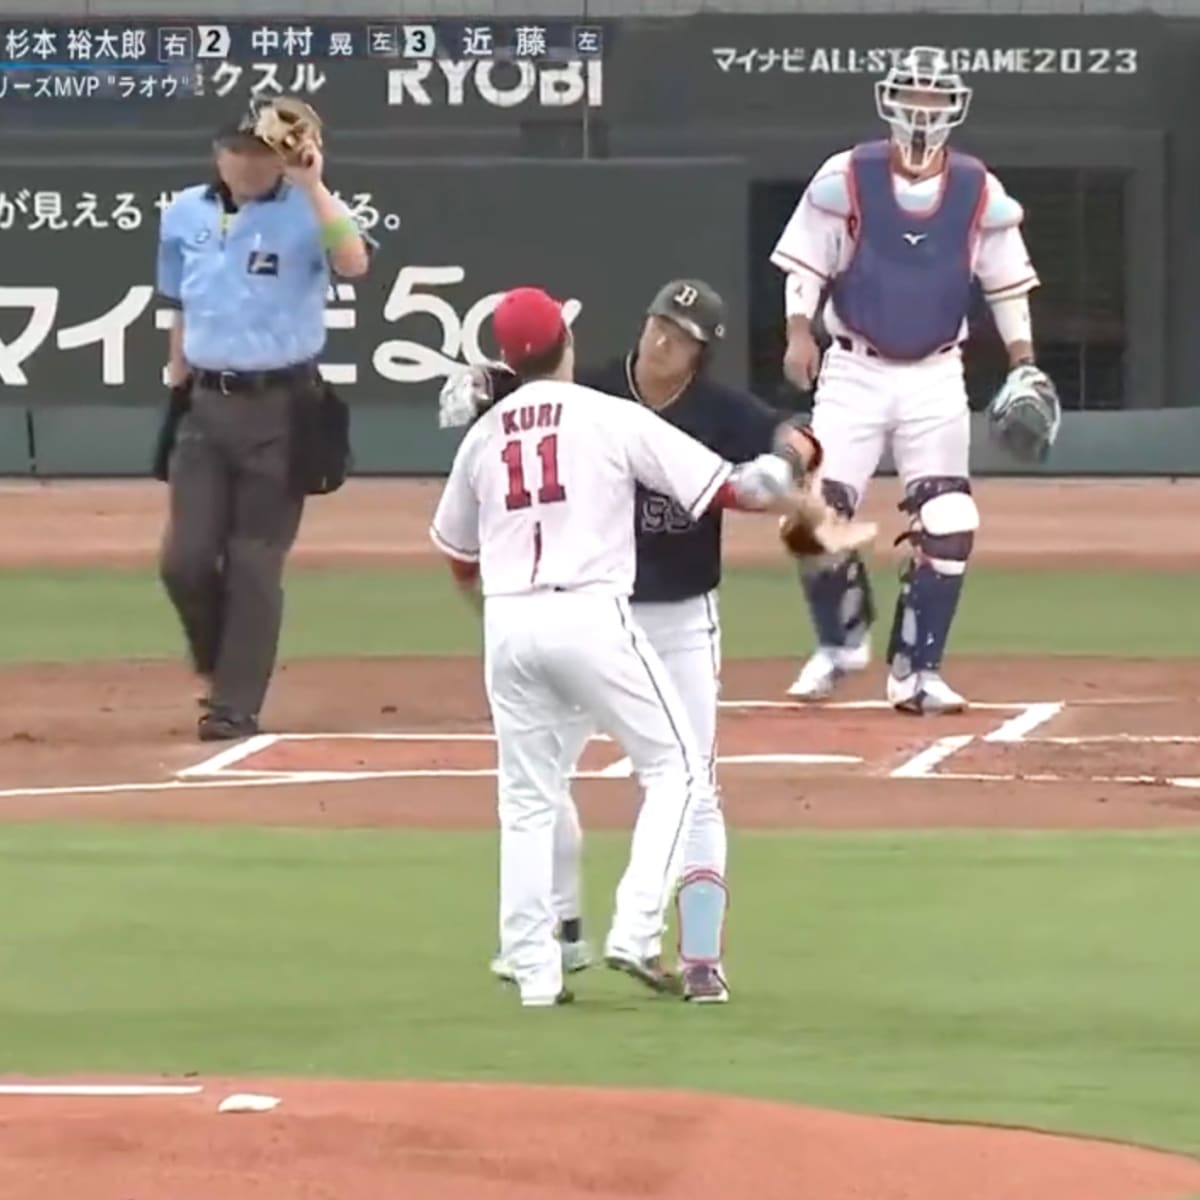 Mysterious sport “speed ball” causes chuckles in Japan